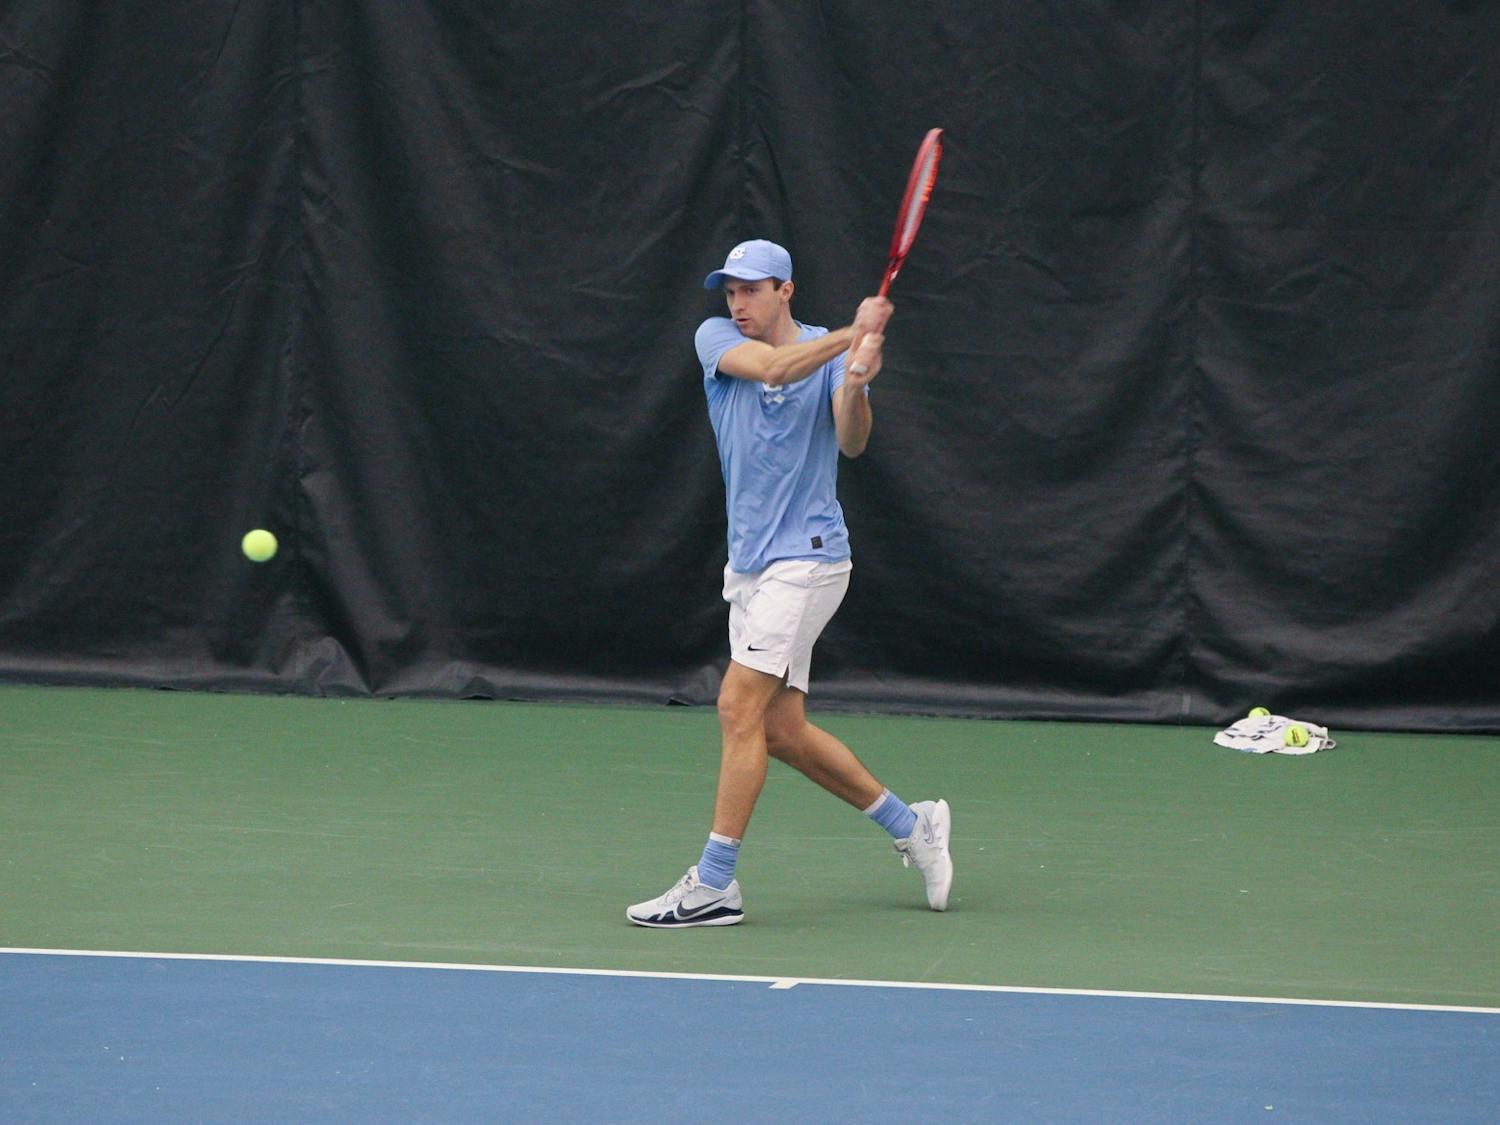 UNC senior Brian Cernoch returns a volley during the Tar Heels’ 4-2 victory over South Carolina in the Cone-Kenfield Tennis Center on Feb. 13, 2022.